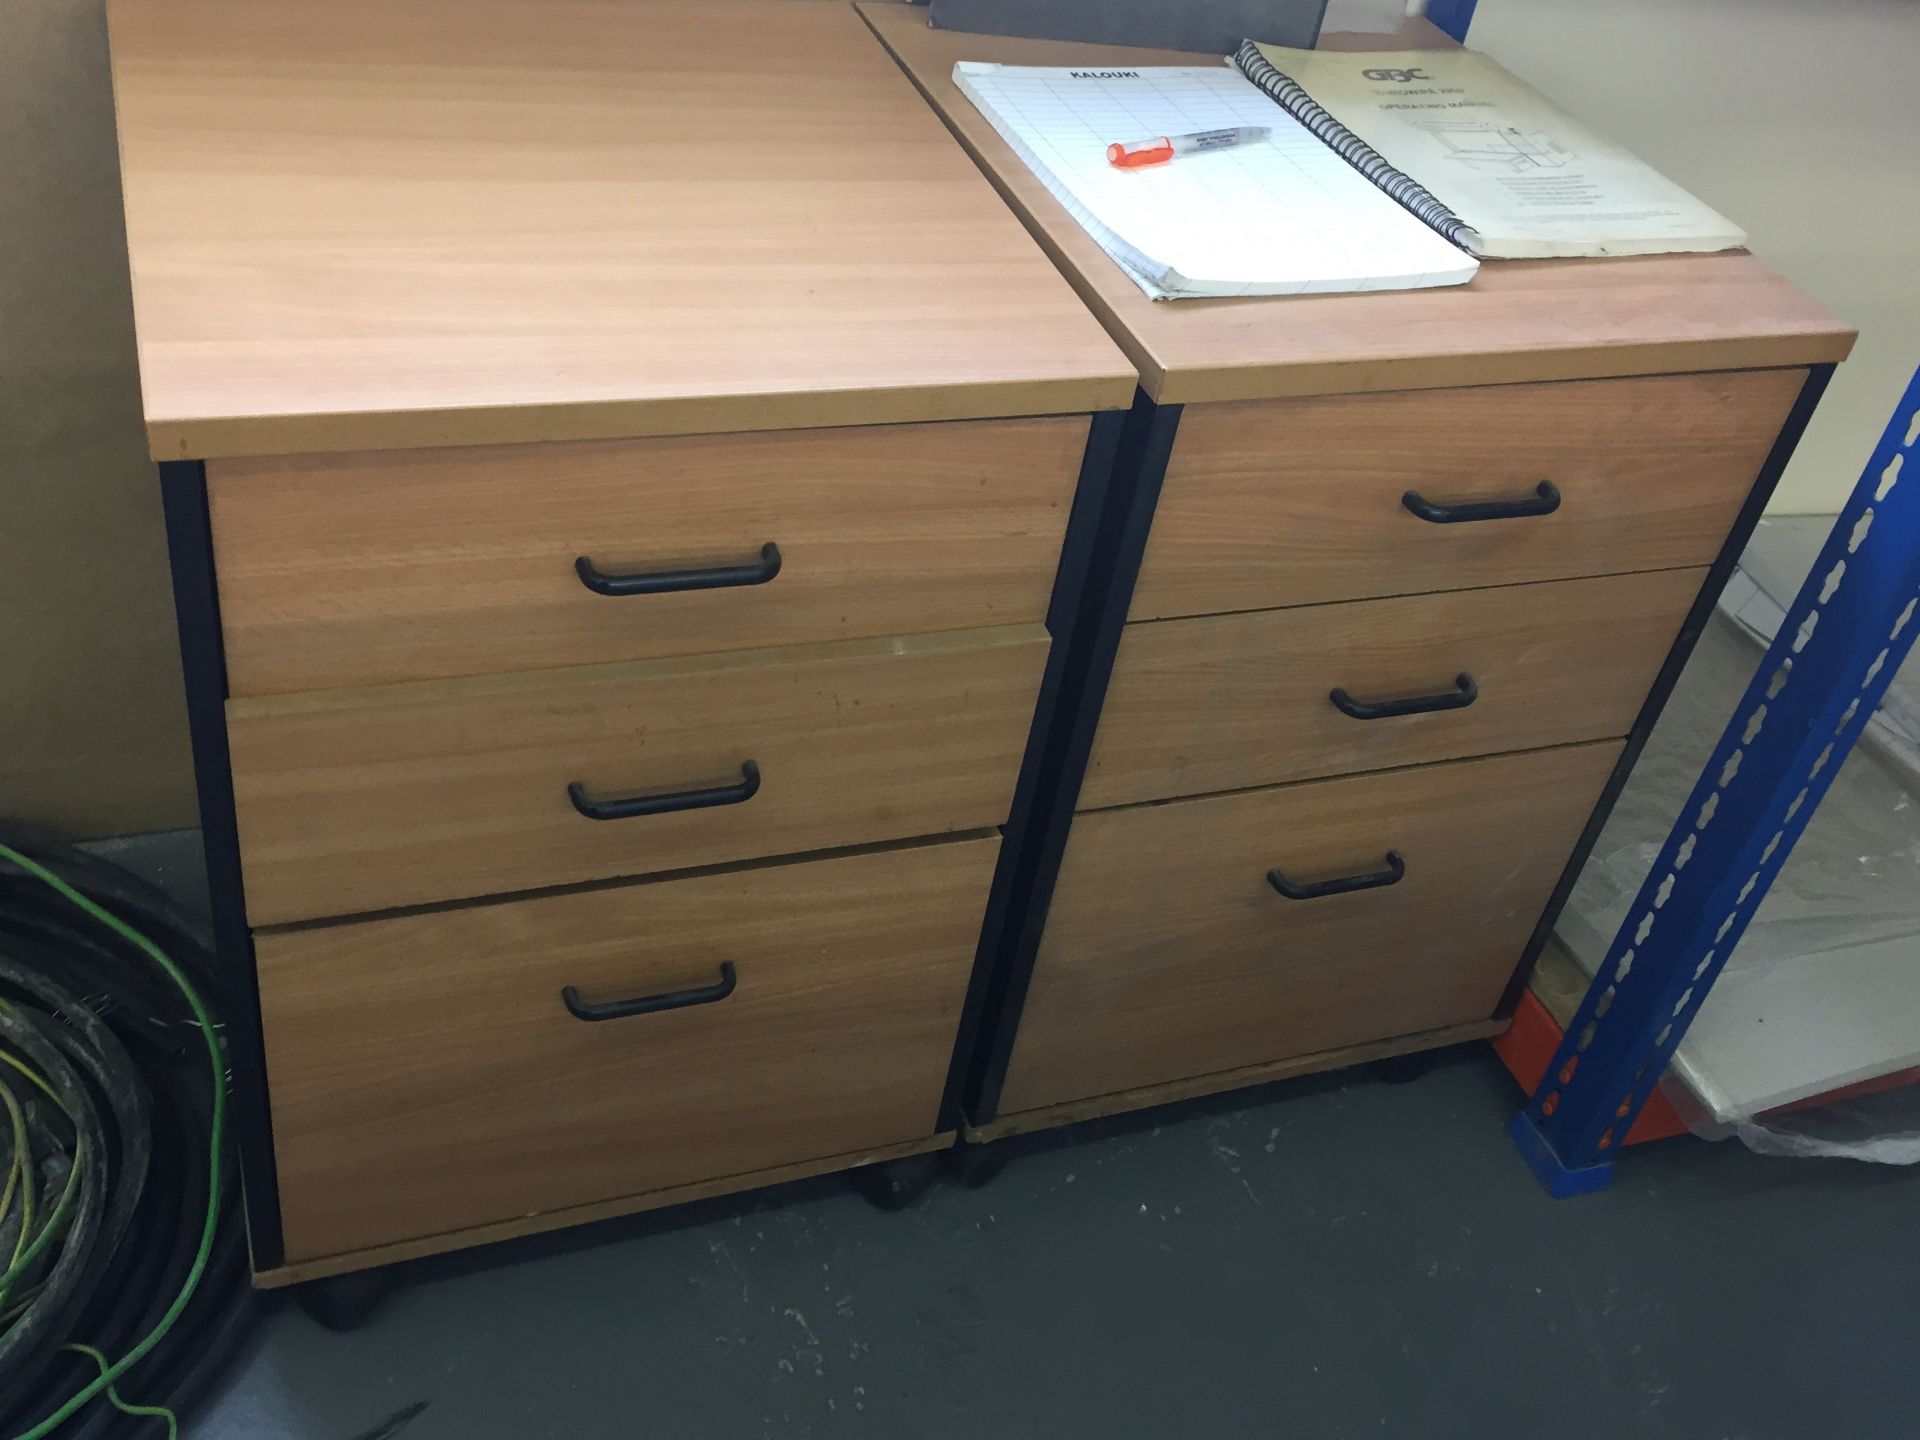 2 x 3-Drawer Chest of Drawers - CL171 - Location: London, N4 - Image 2 of 2